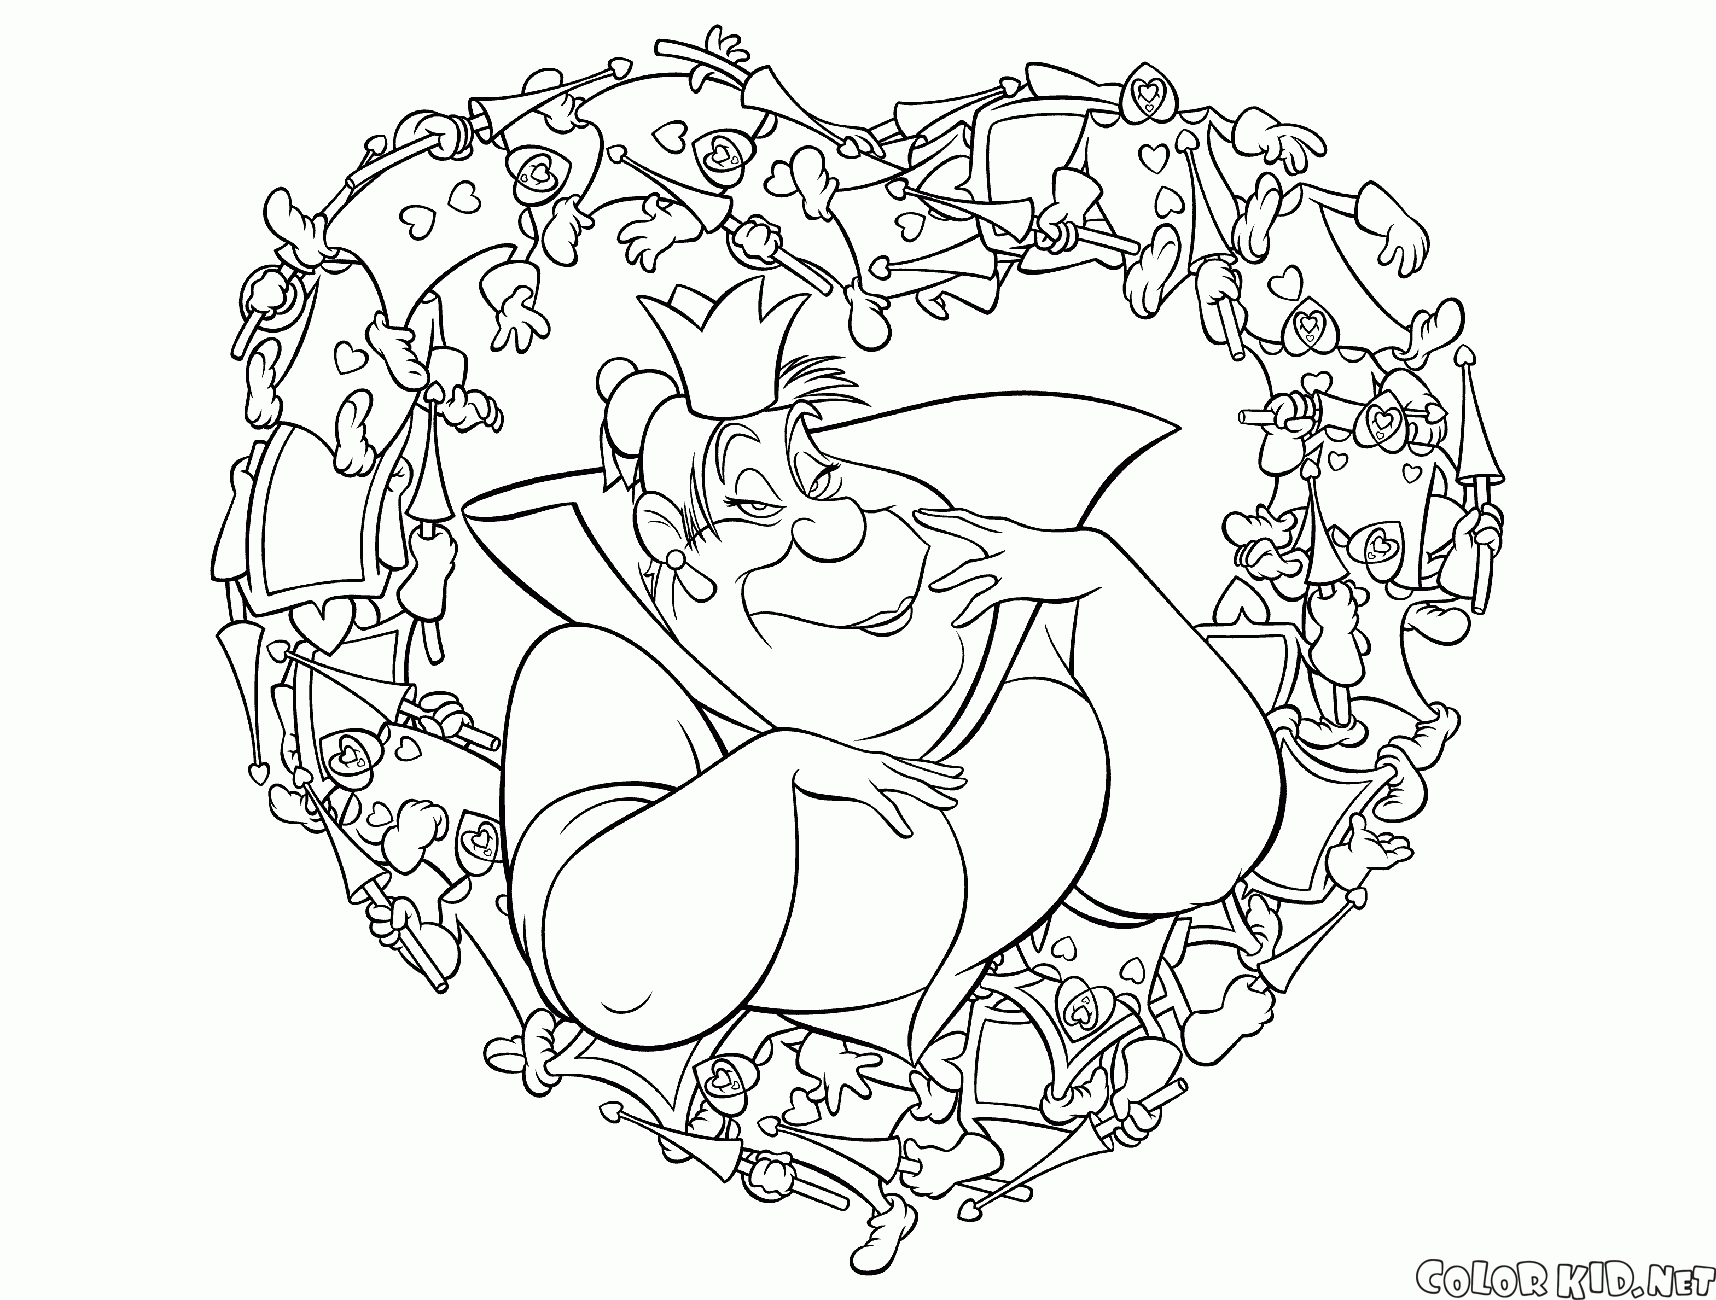 Coloring page - Queen of Hearts